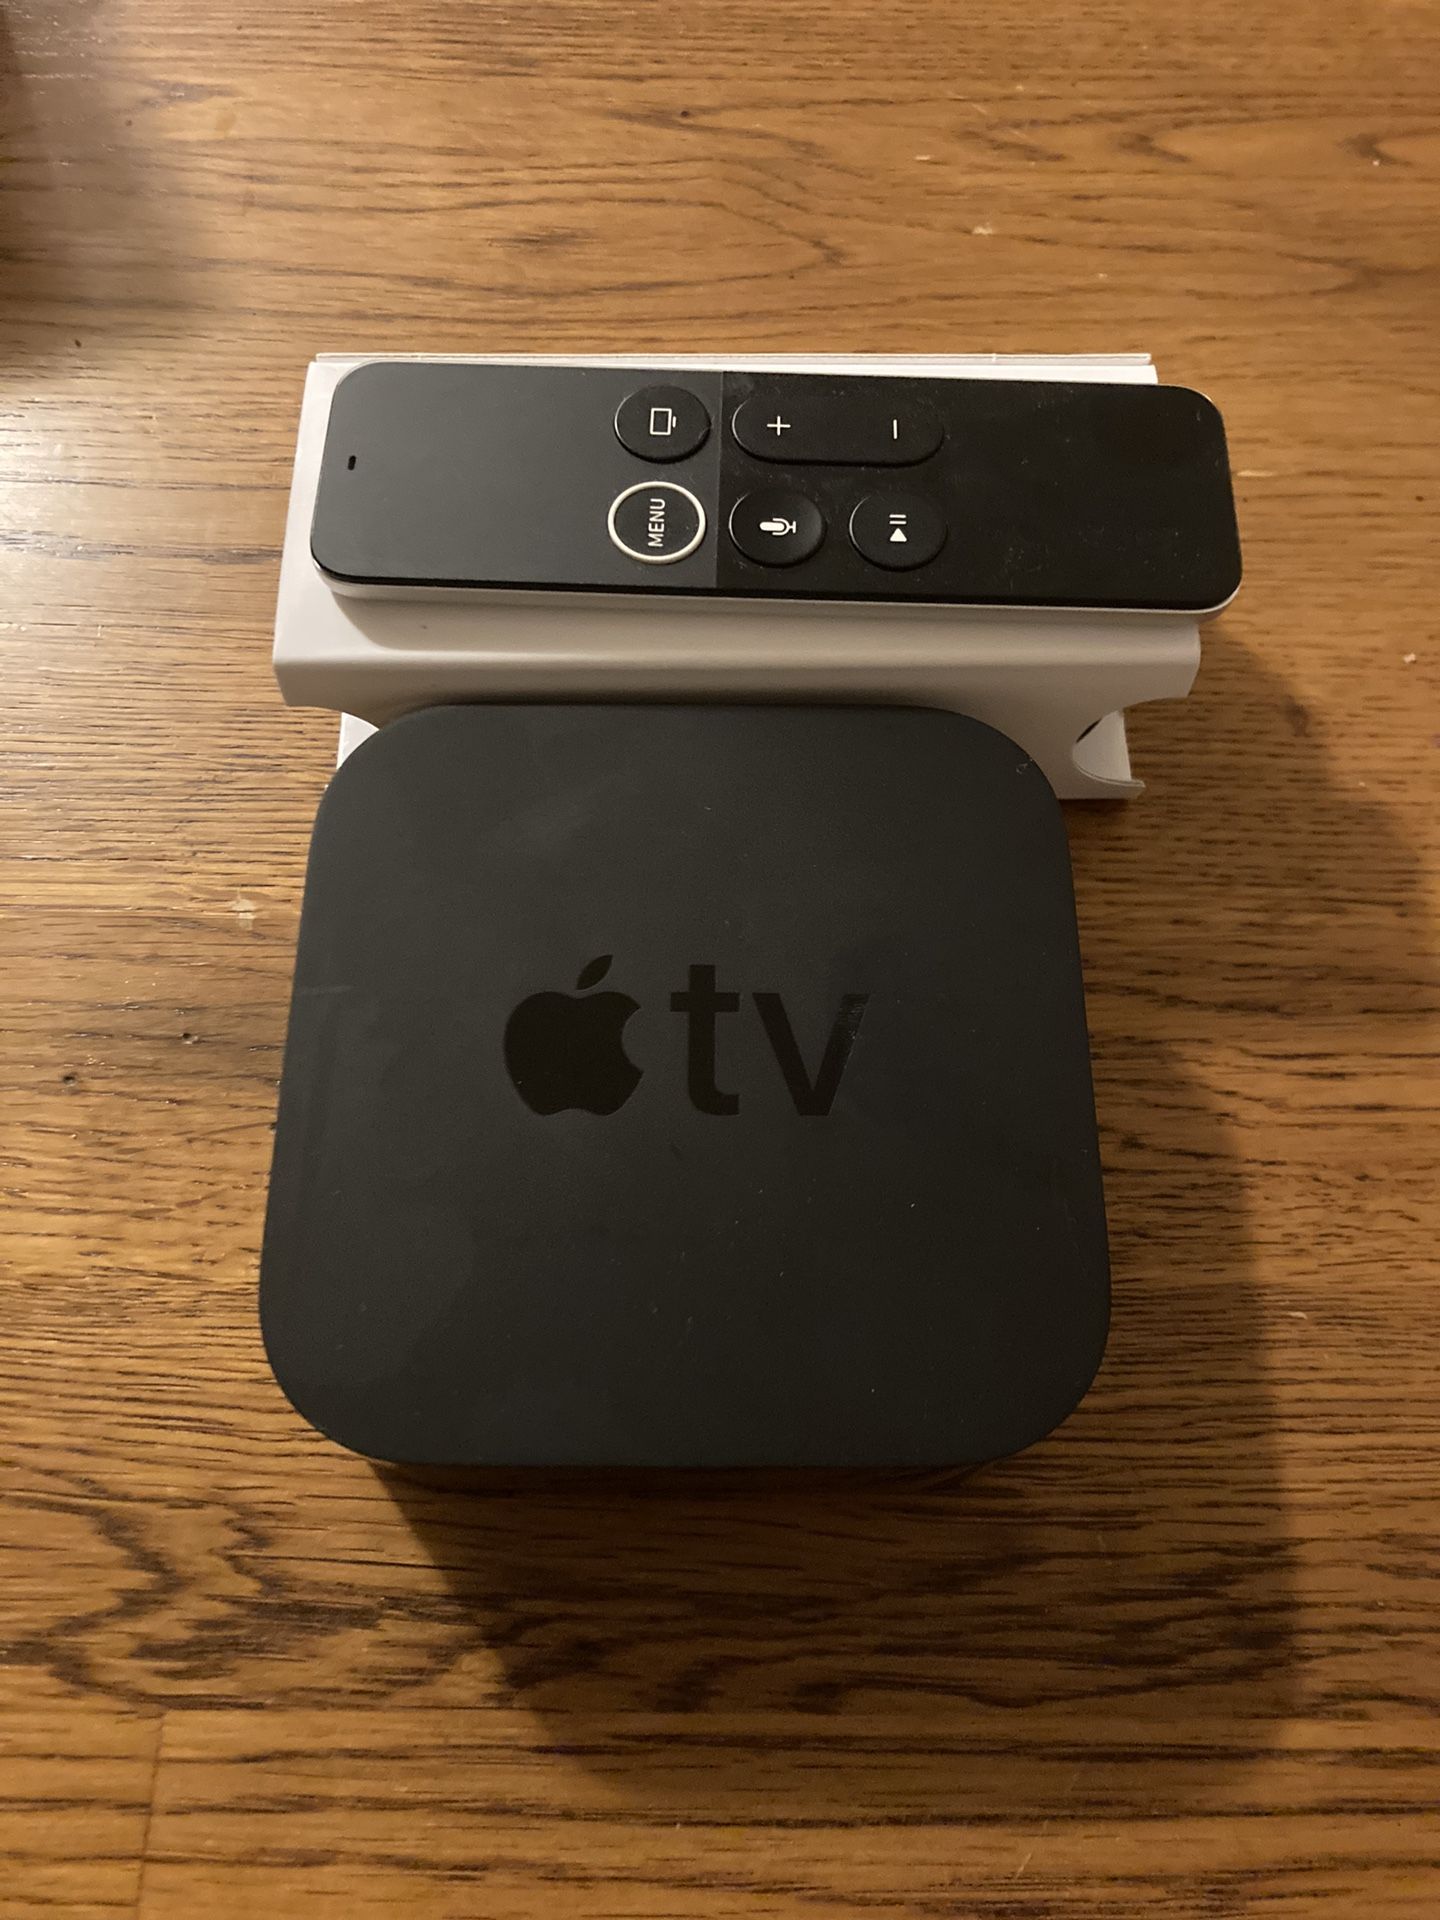 Apple TV 4K Comes With Netflix, Hulu And More 